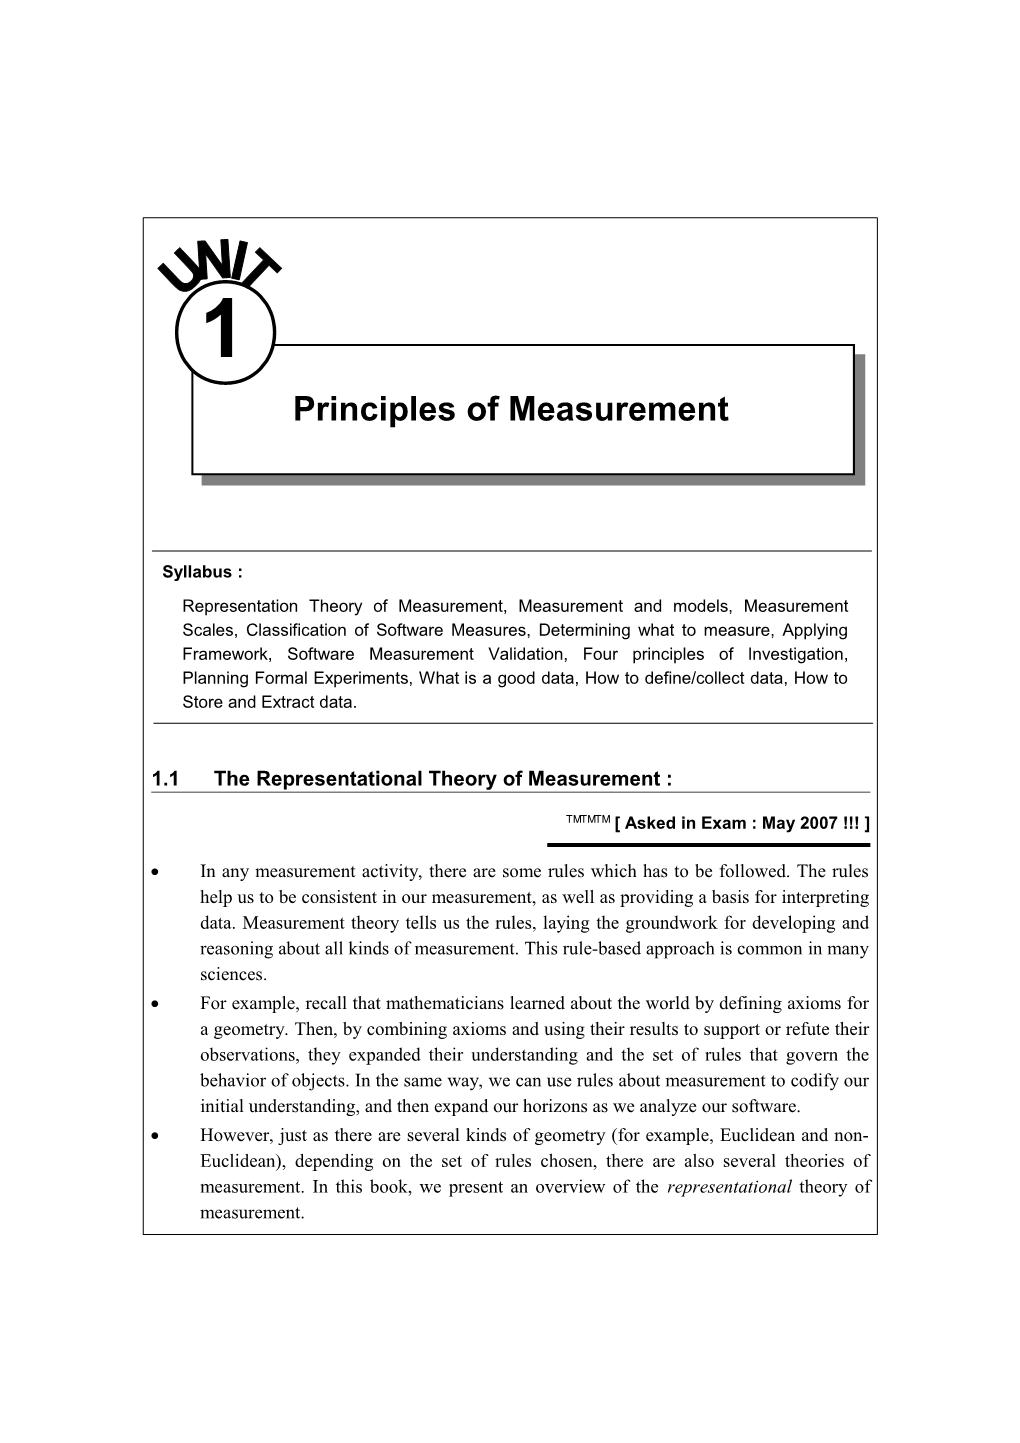 1.1 the Representational Theory of Measurement